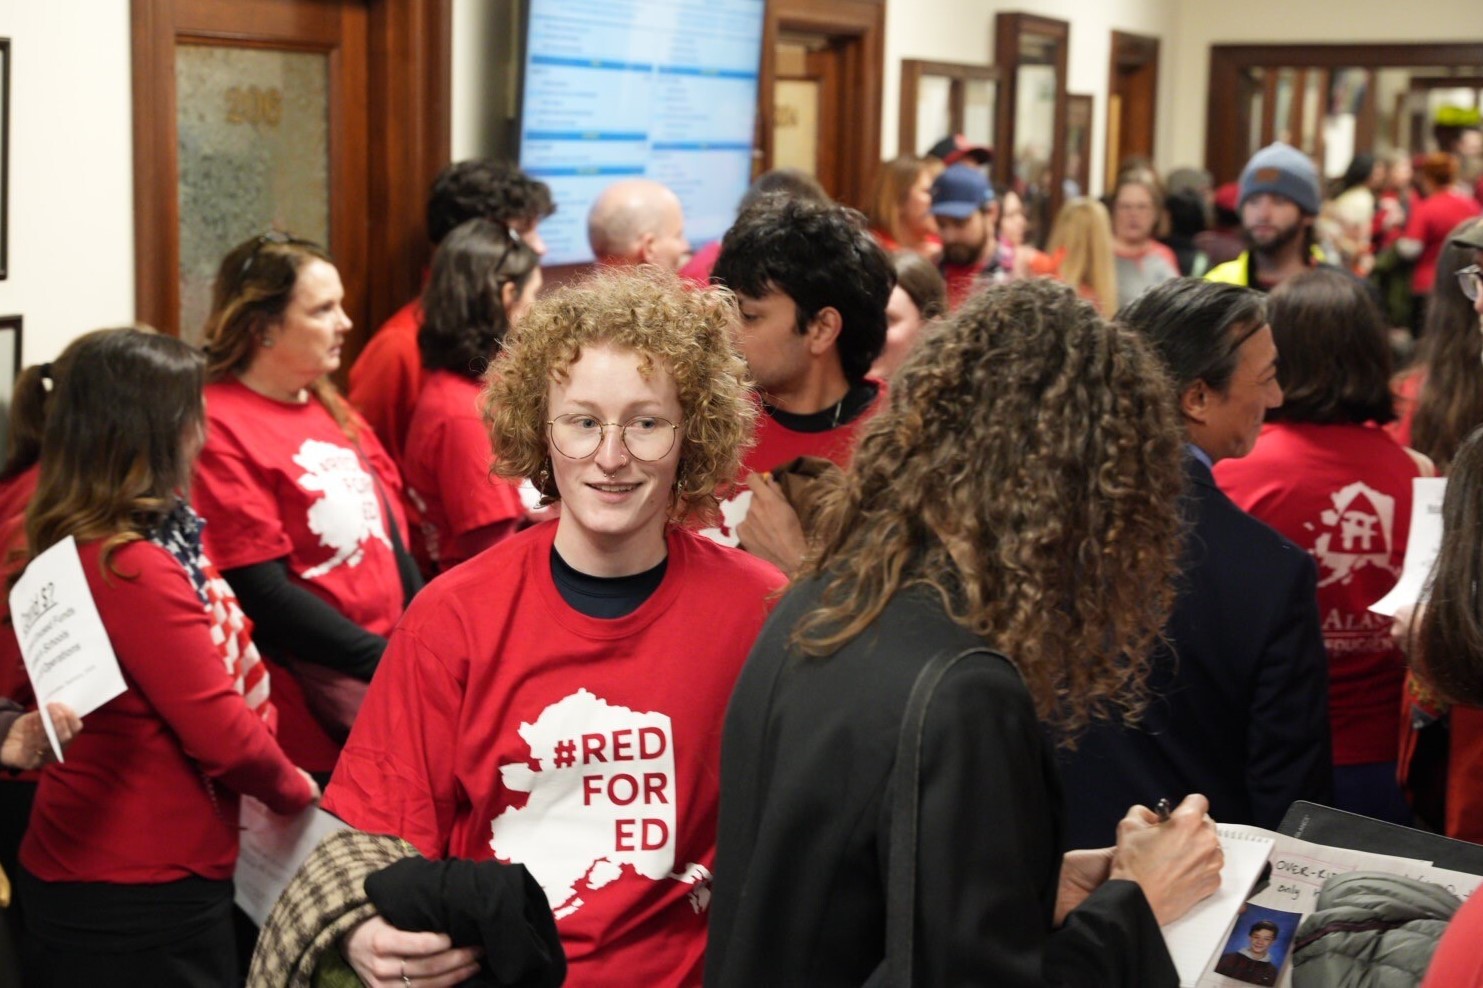 people in red t shirts crowd a hallway